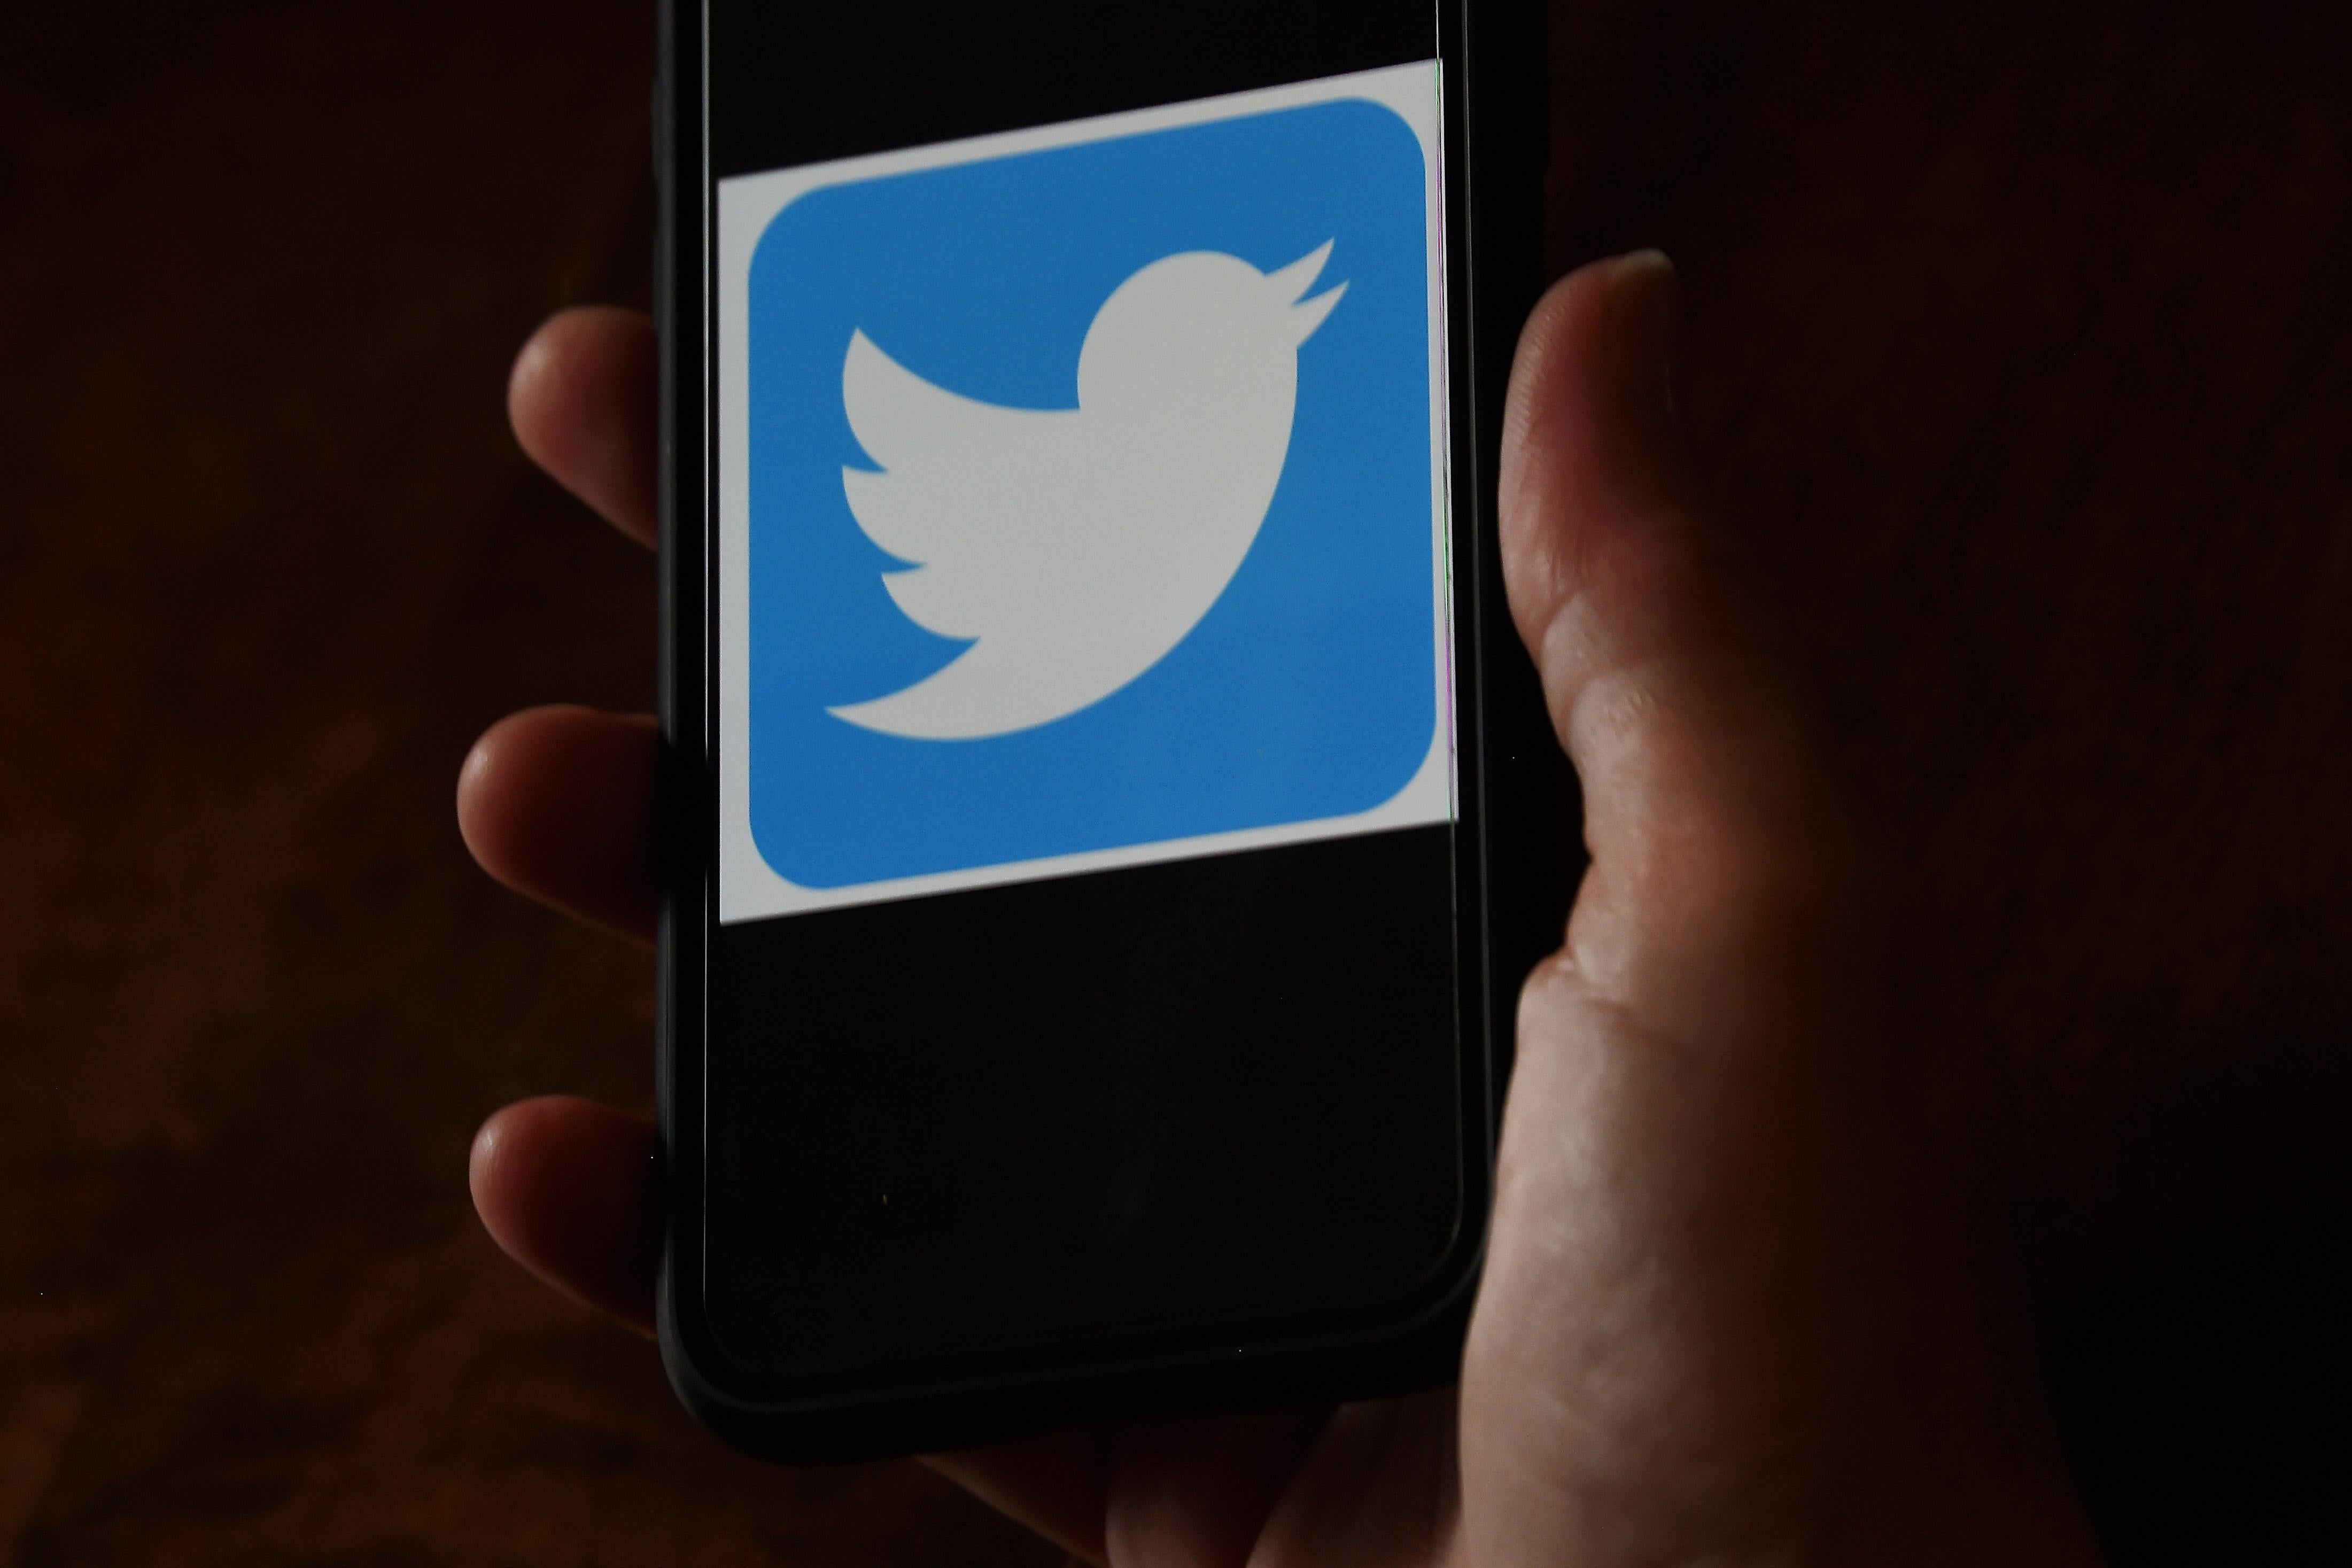  A Twitter logo is displayed on a mobile phone.